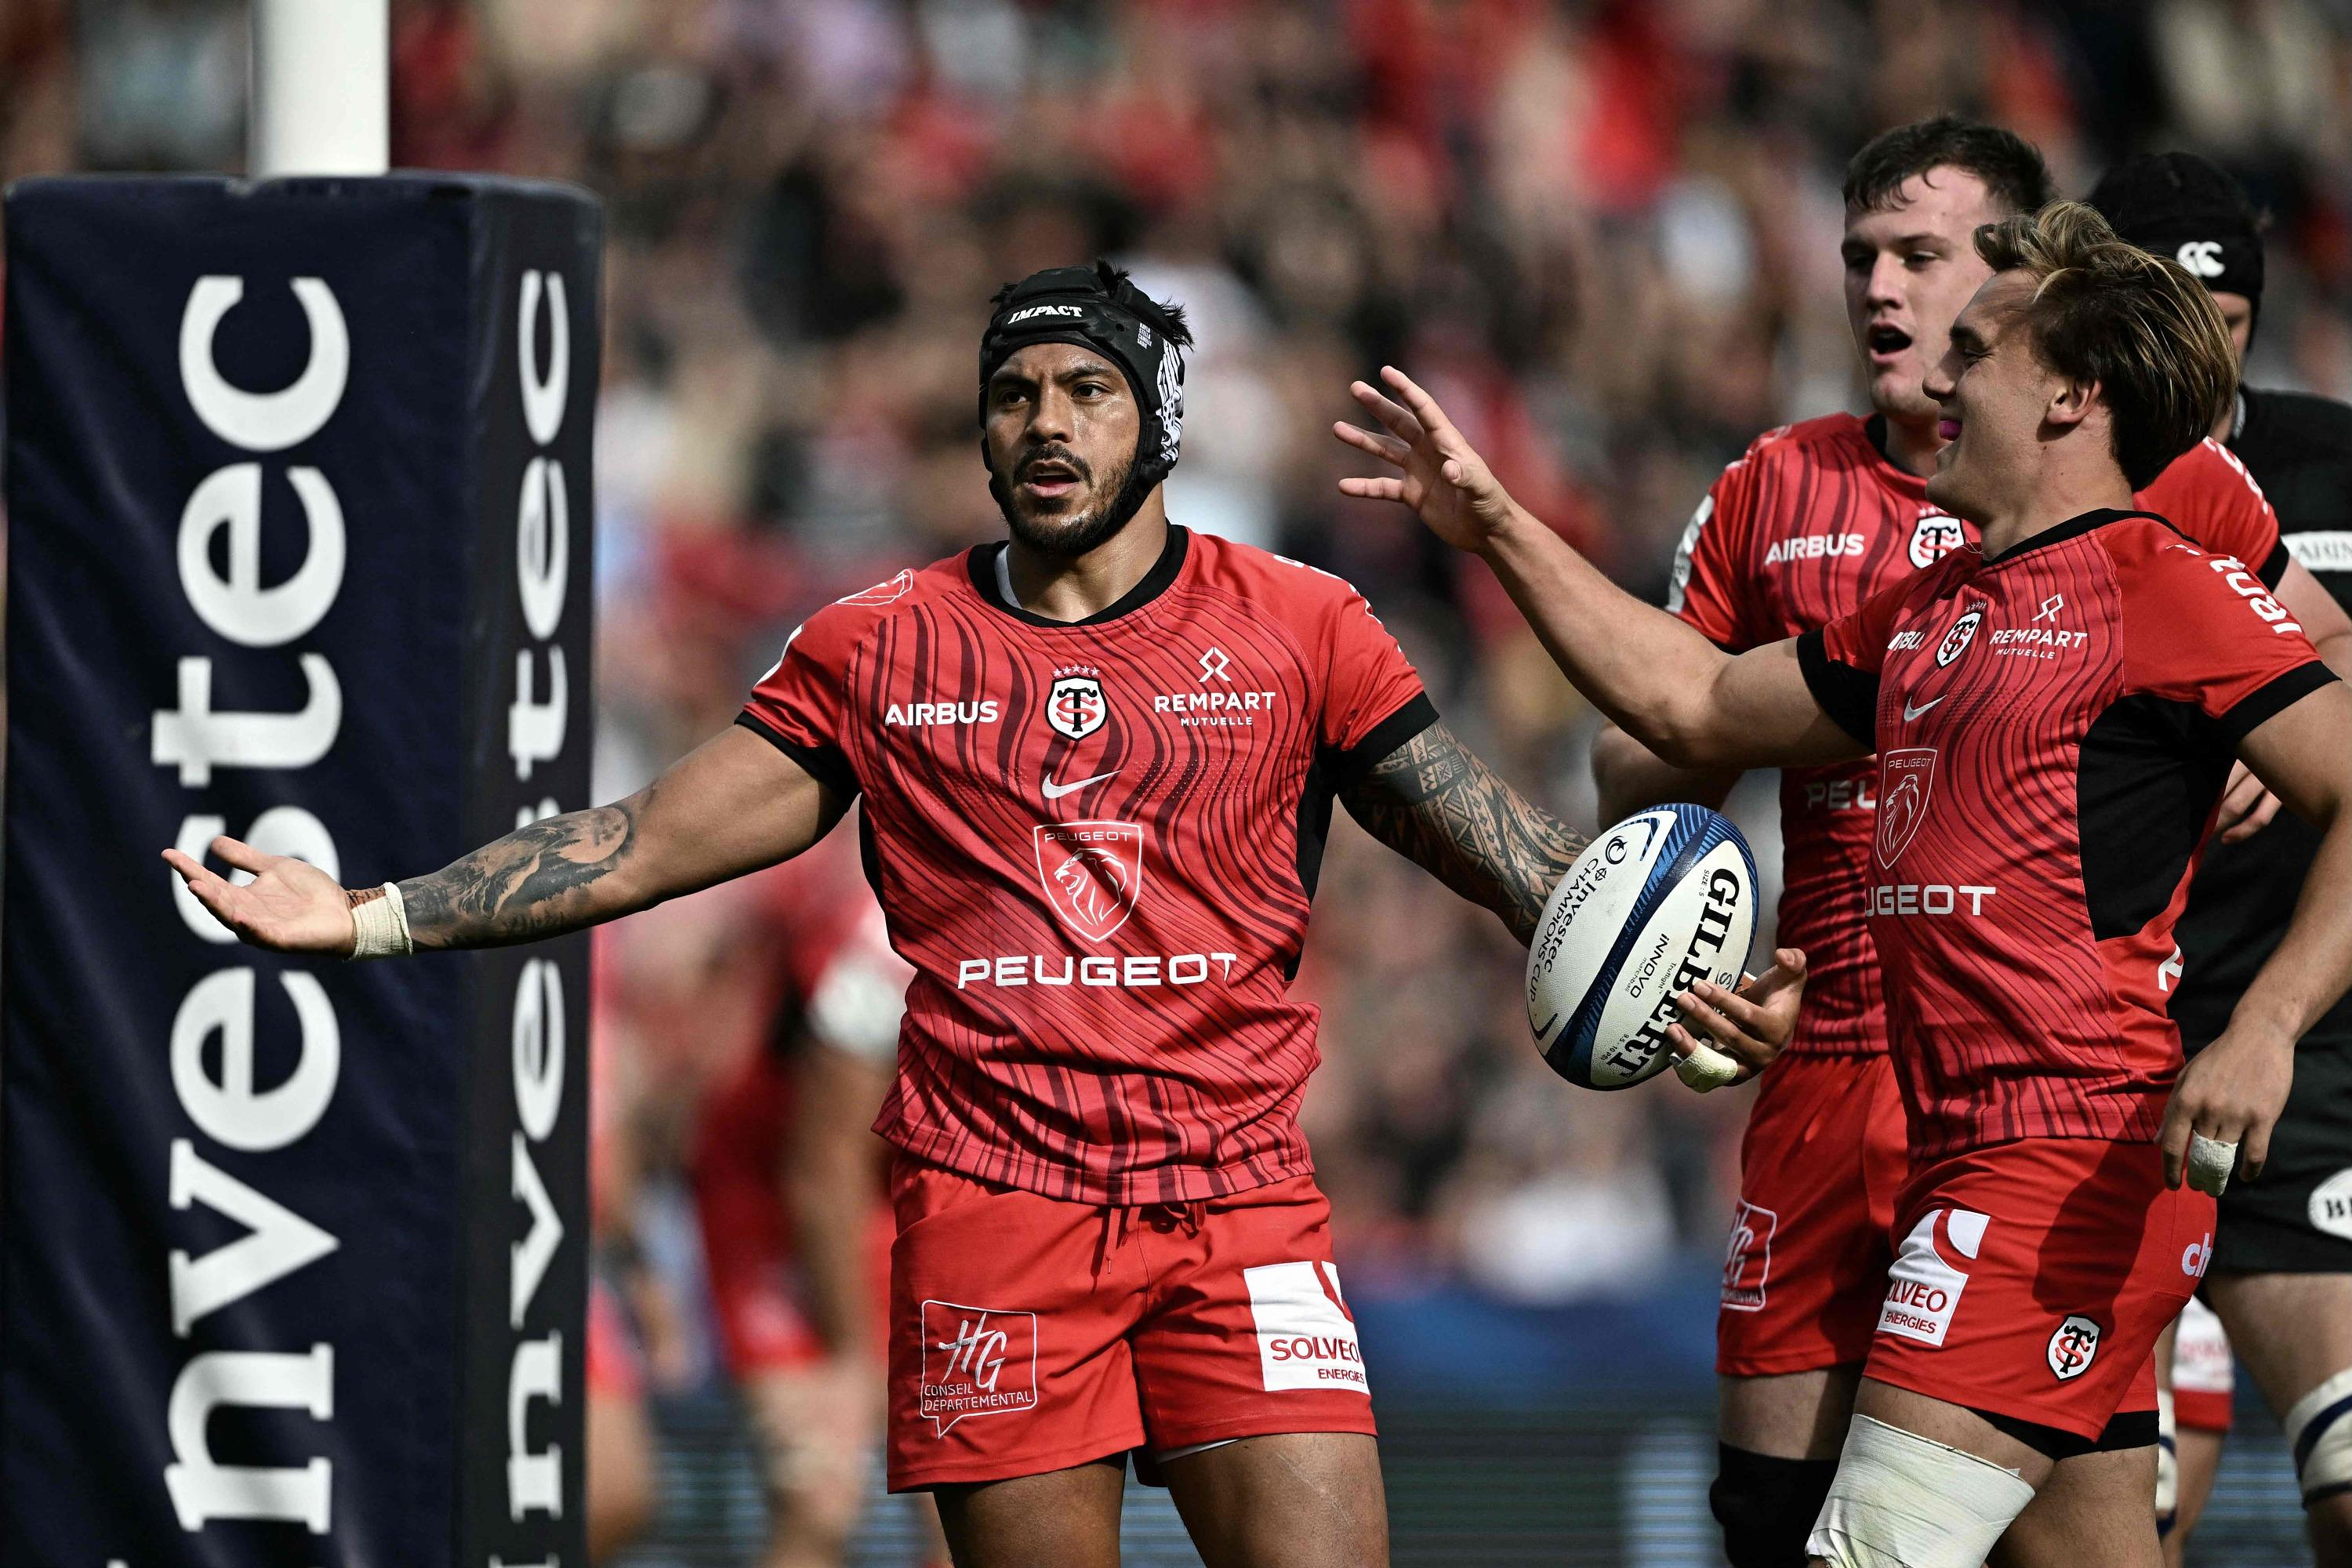 Champions Cup: in video, the summary of the Toulouse trip against Racing 92